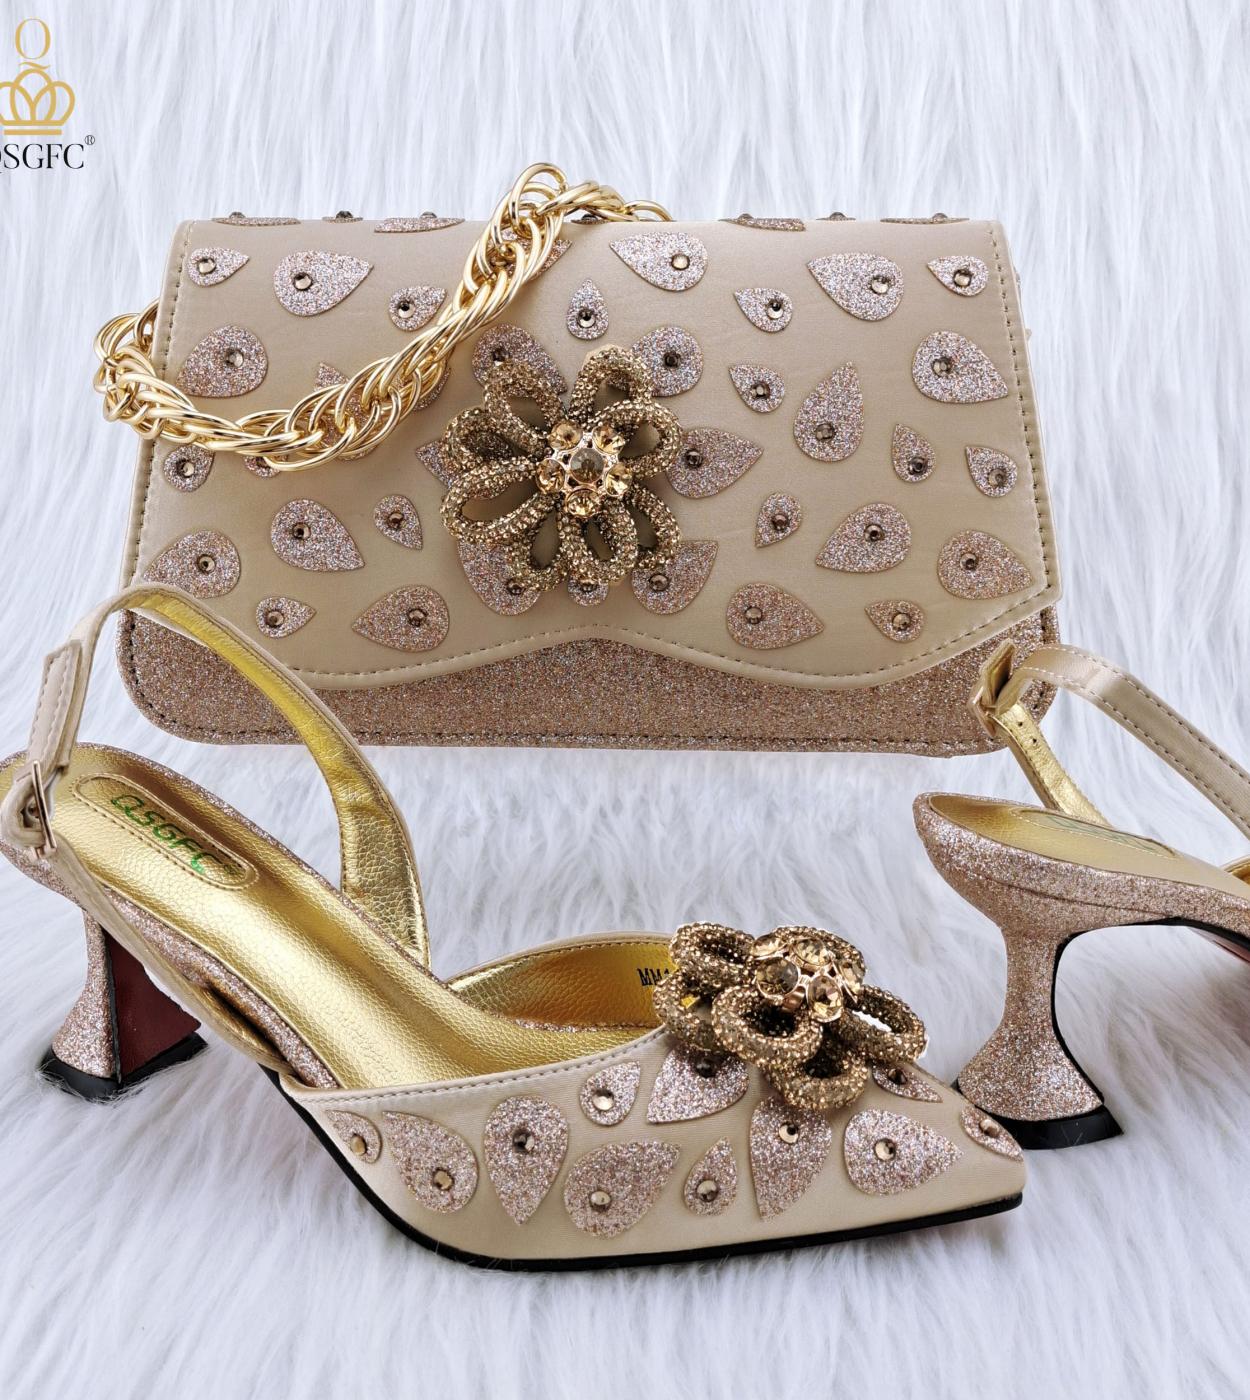 Qsgfc Newly Arrived Classic Style Gold Color Womens Hand Bag Matching High Heels African Wedding Party Shoe And Bag Set